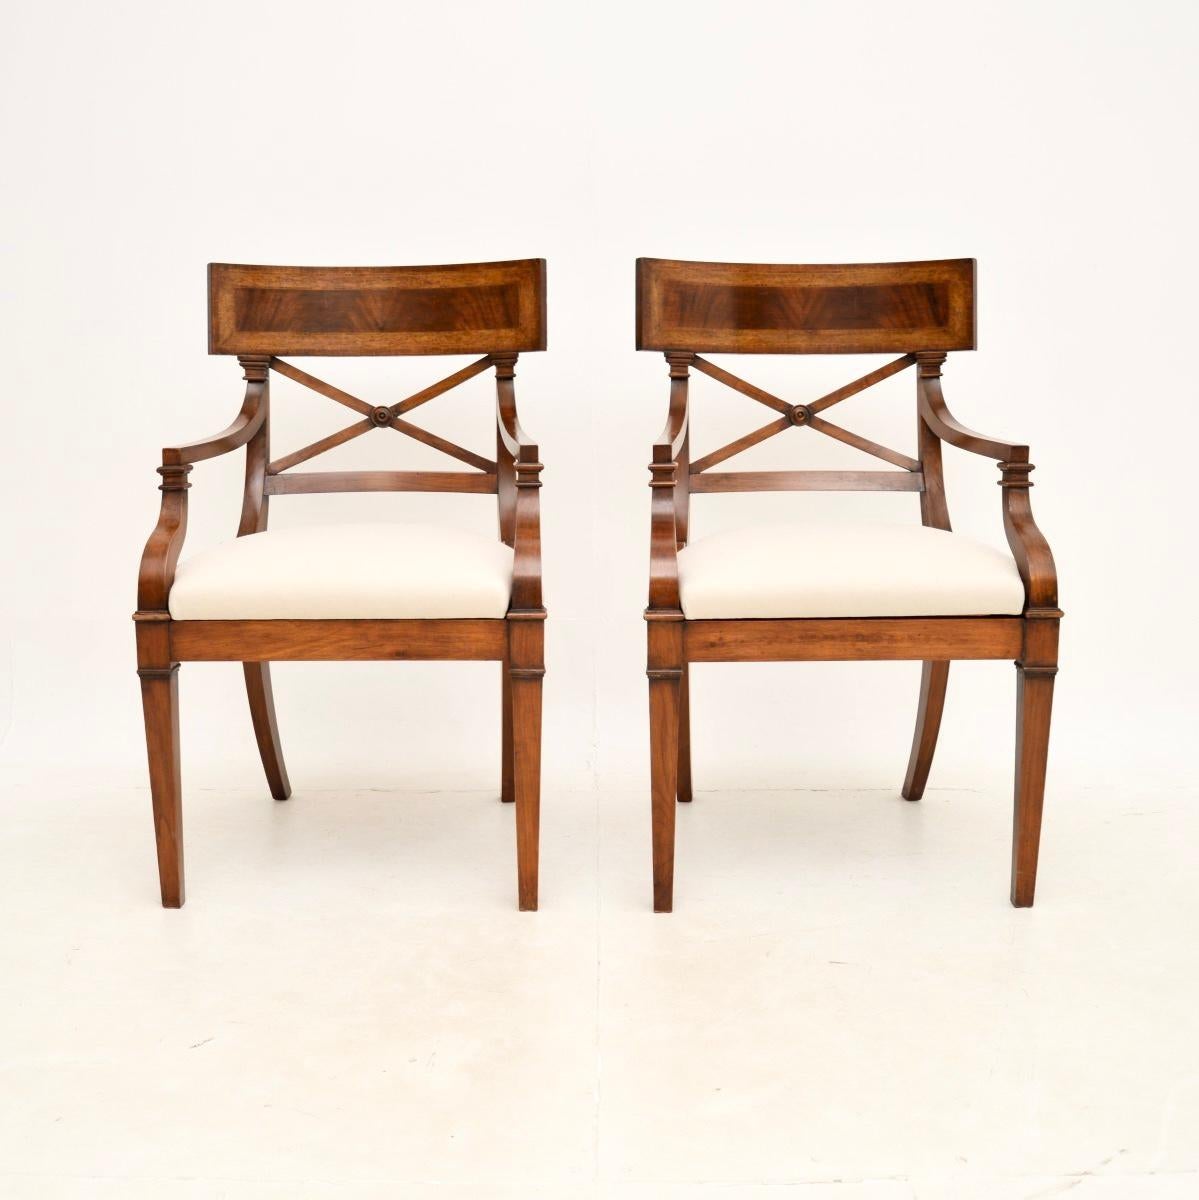 A smart and very well made pair of antique Regency style armchairs. They were made in England, and date from around the 1950’s.

The quality is outstanding, these are beautifully crafted with lovely inlaid borders on the Trafalgar back rests. They